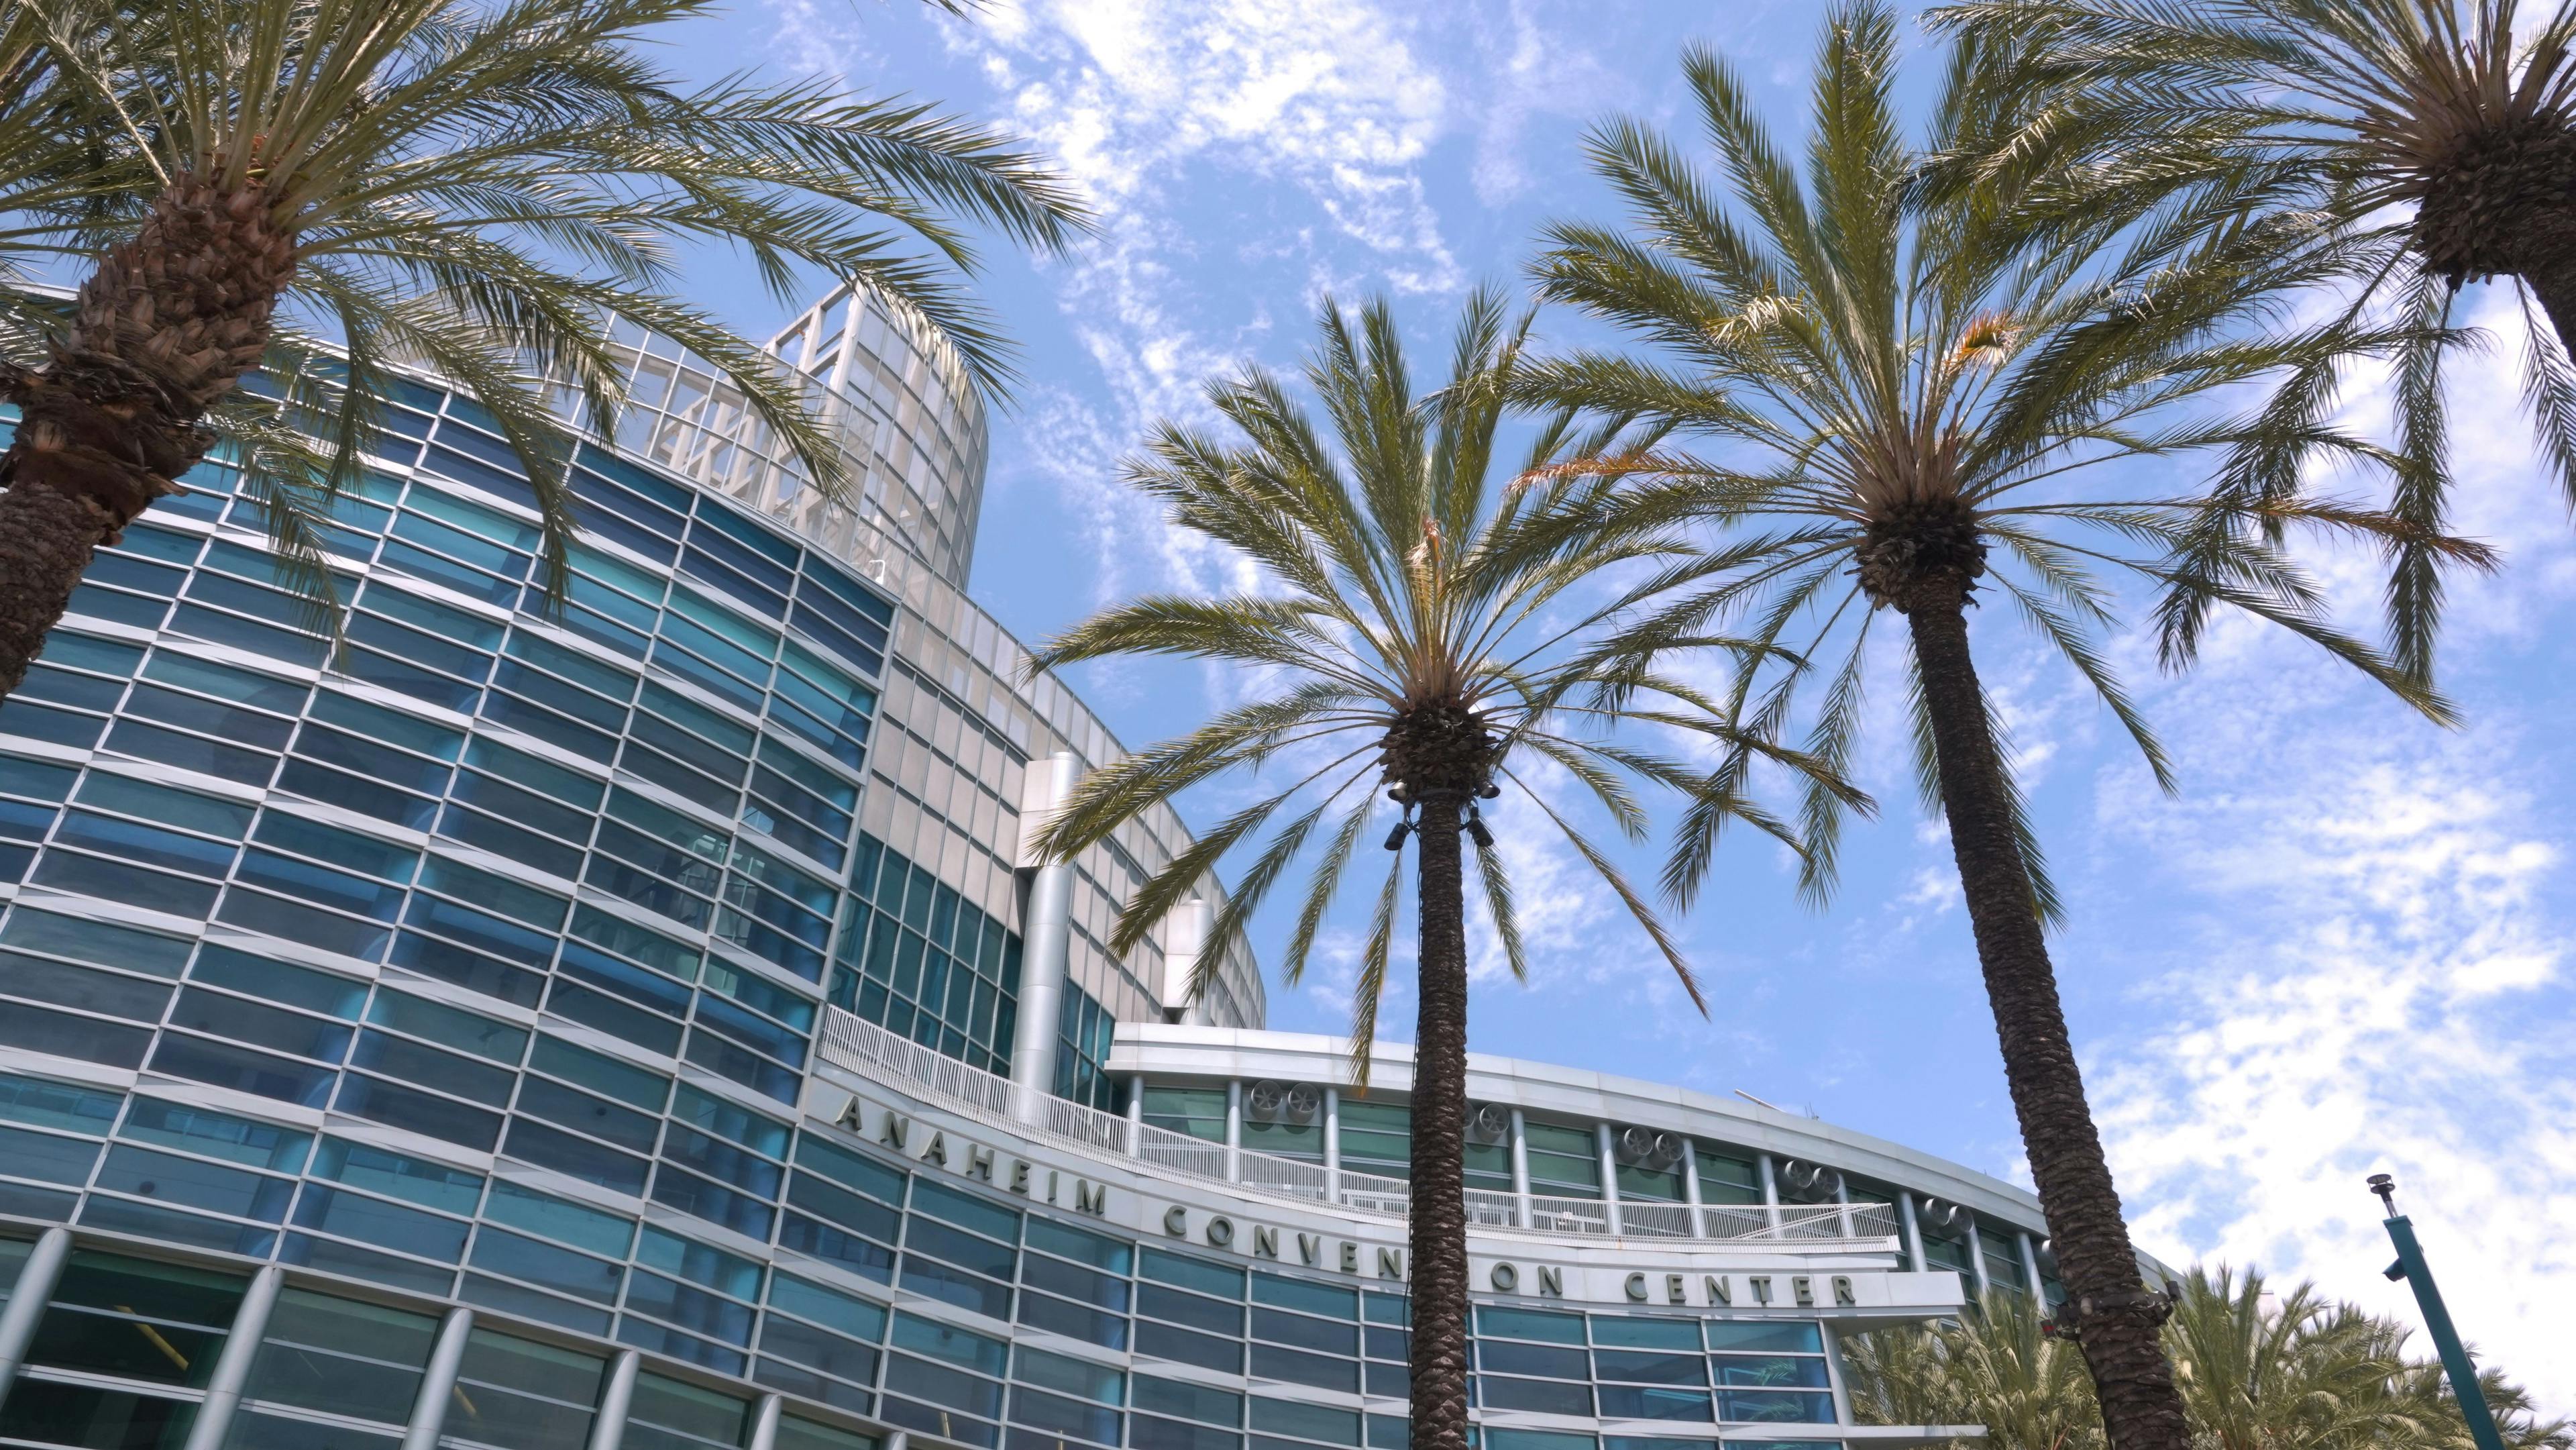 The 2024 ASMS conference will take place at the Anaheim Convention Center. © Simone - stock.adobe.com